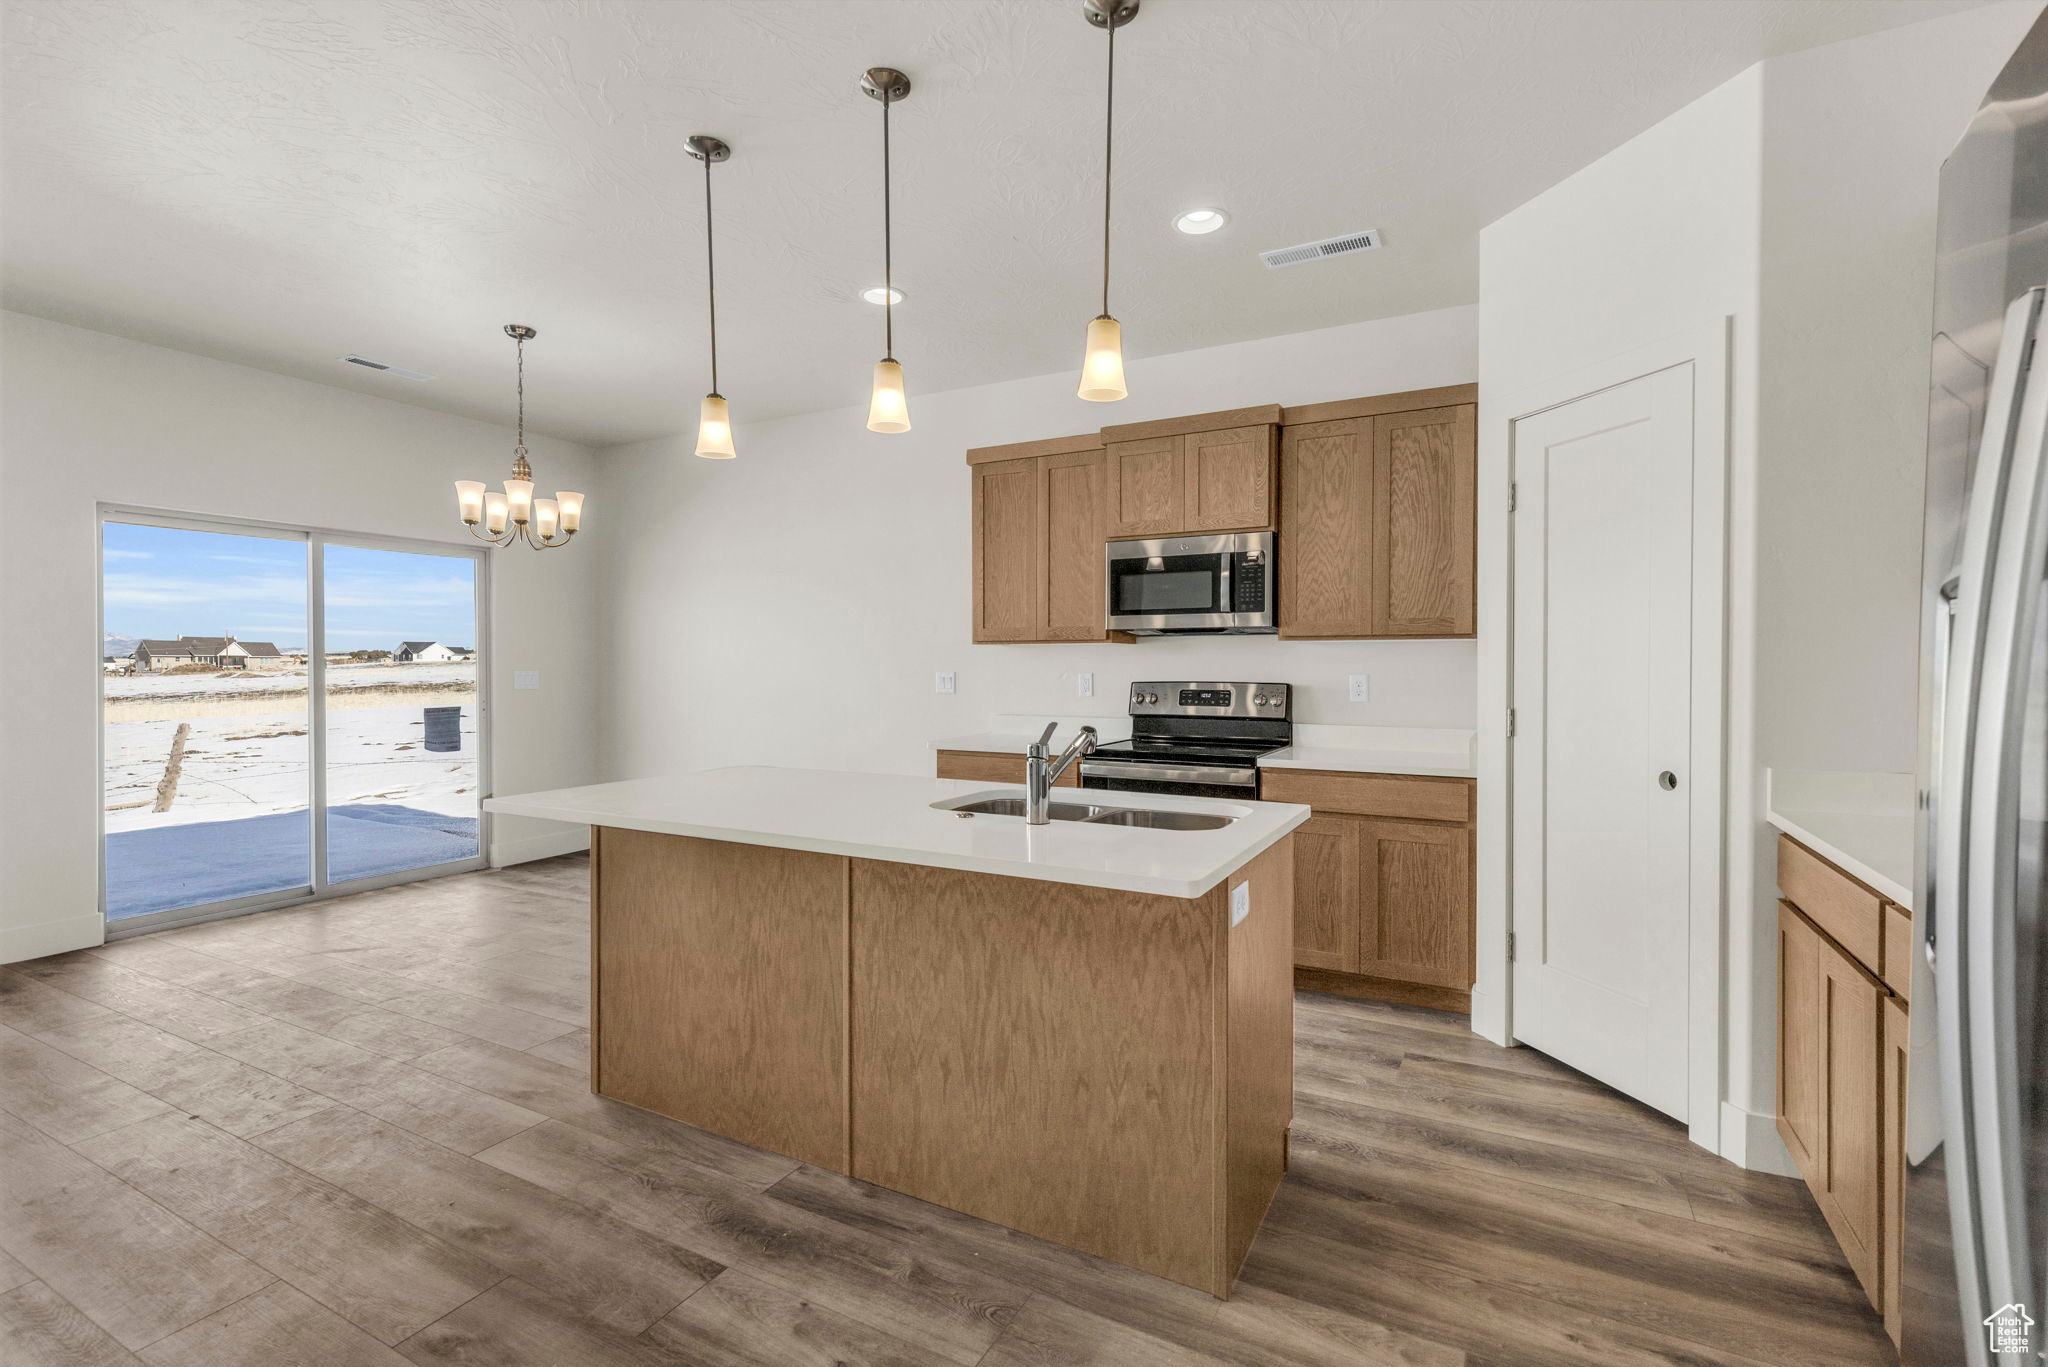 Kitchen with light hardwood / wood-style flooring, appliances with stainless steel finishes, decorative light fixtures, and a center island with sink